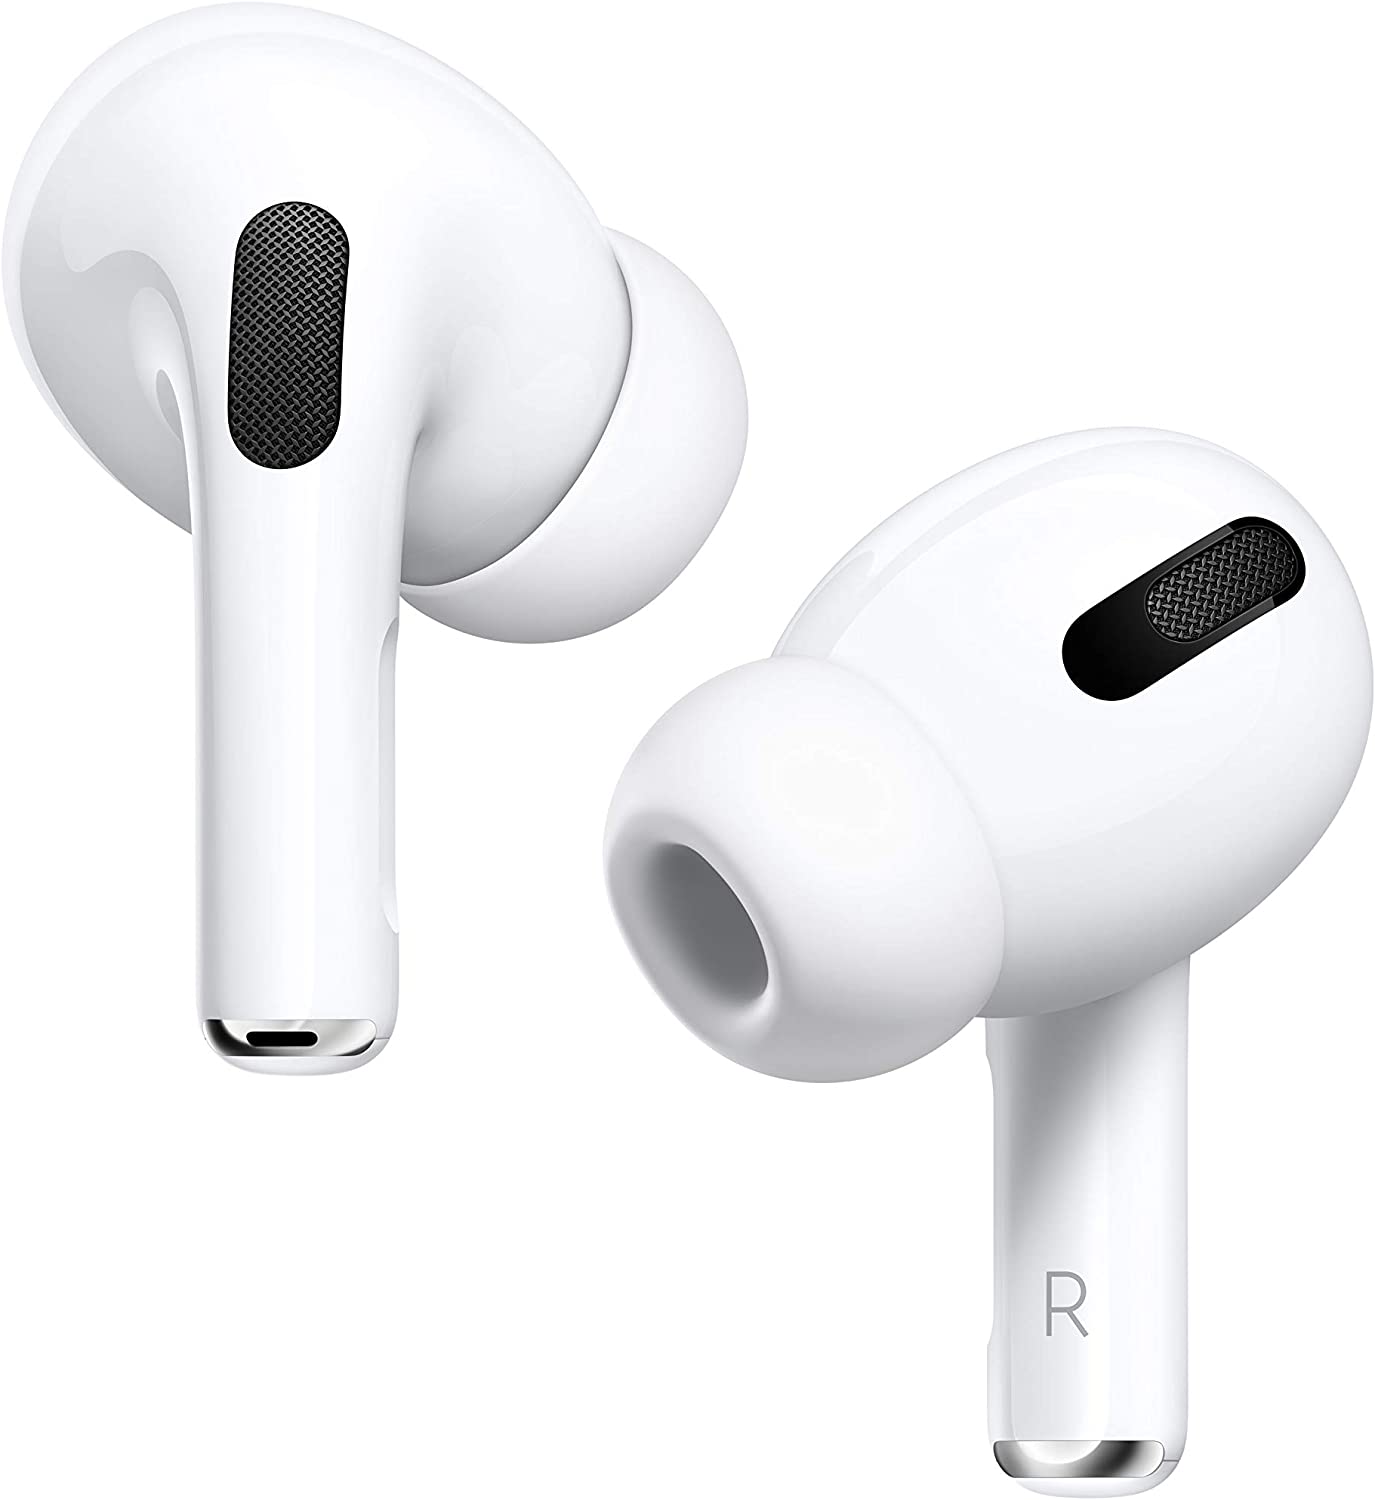 Apple AirPods Pro 1 vs Apple AirPods Pro 2